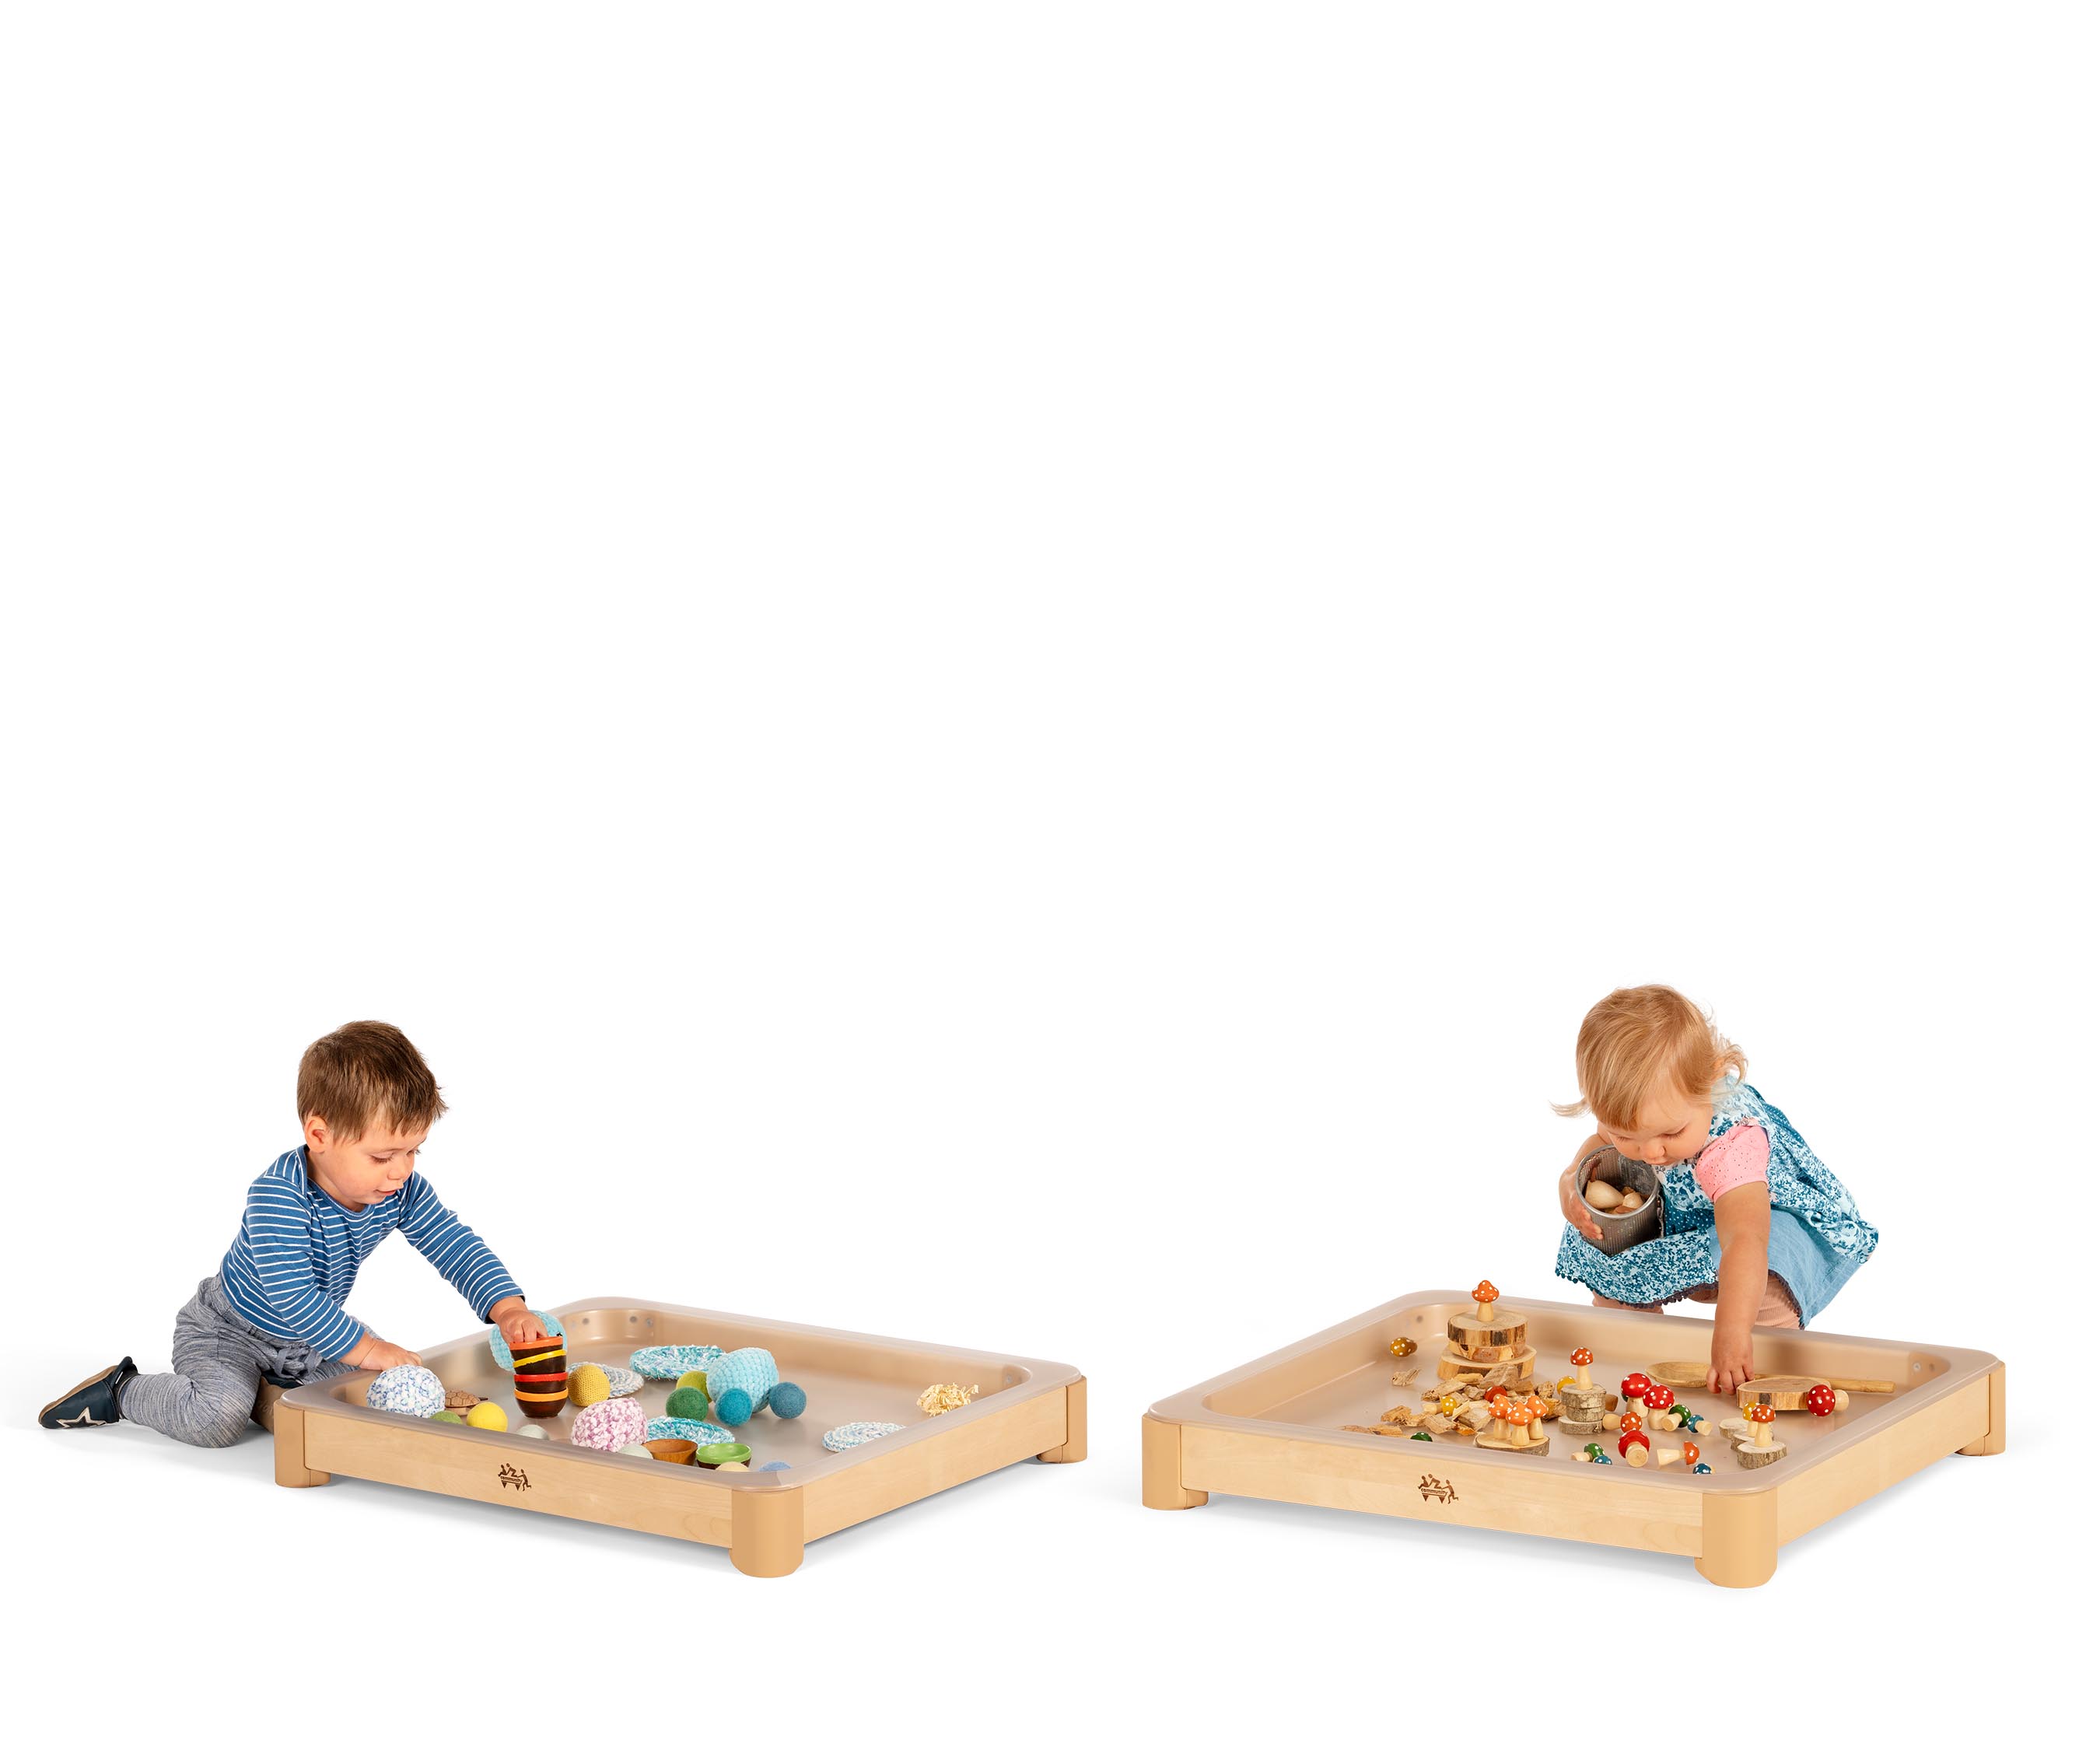 Two babies playing with loose parts and natural materials in the Activity floor tray, an alternative to the tuff tray with a natural look.